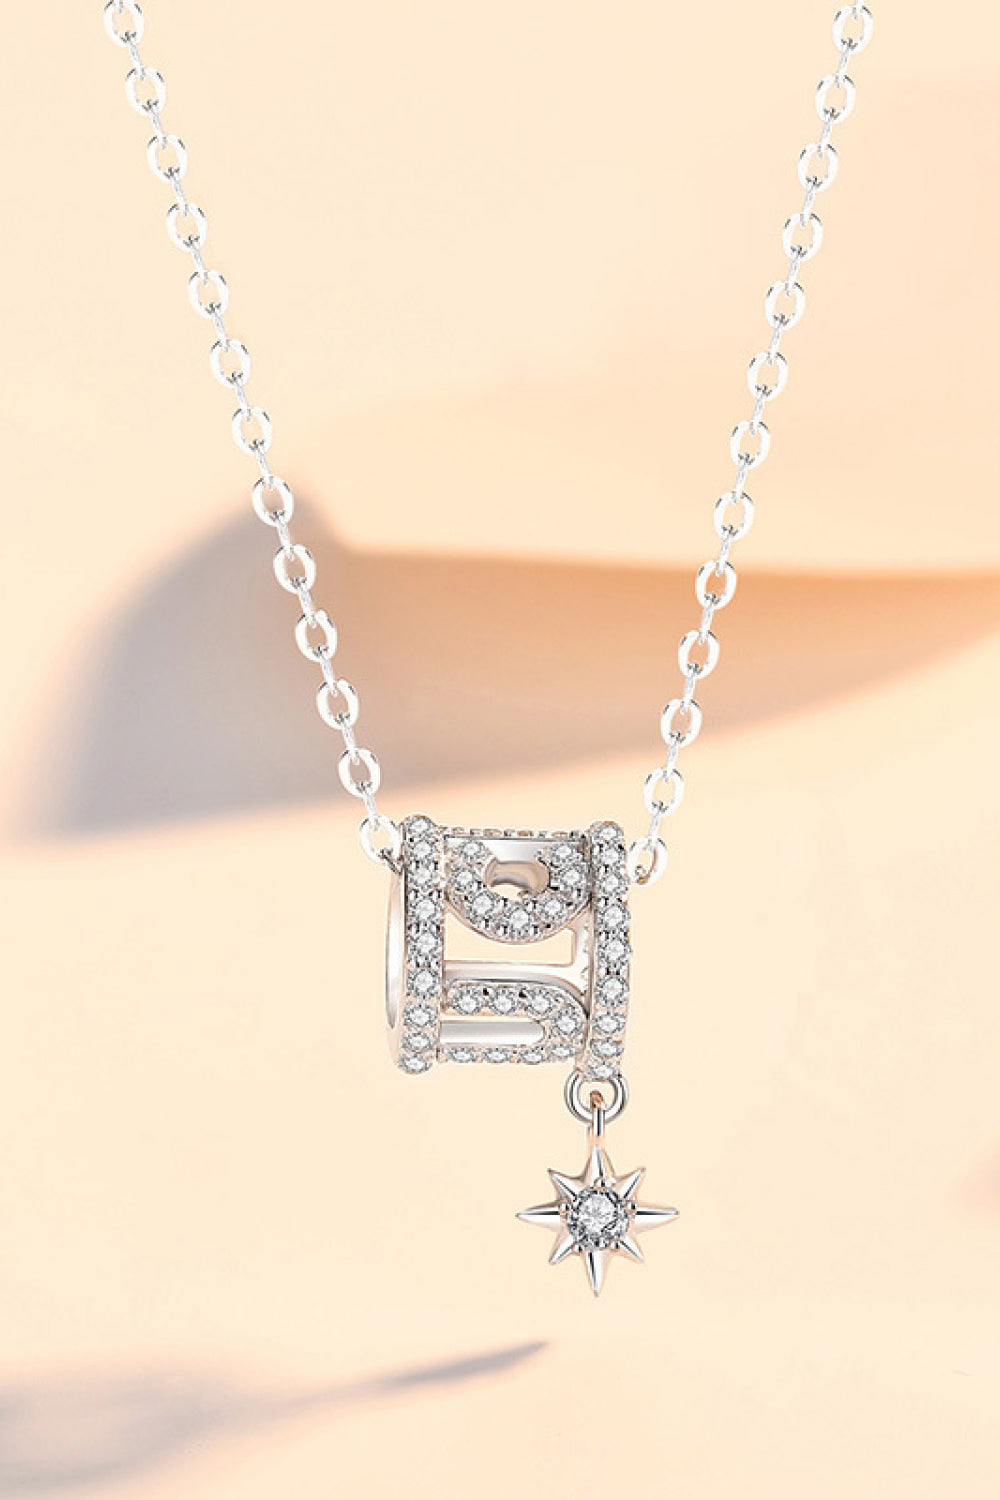 Rely On Fate Cubic Zirconia Pendant Necklace - Necklaces - FITGGINS